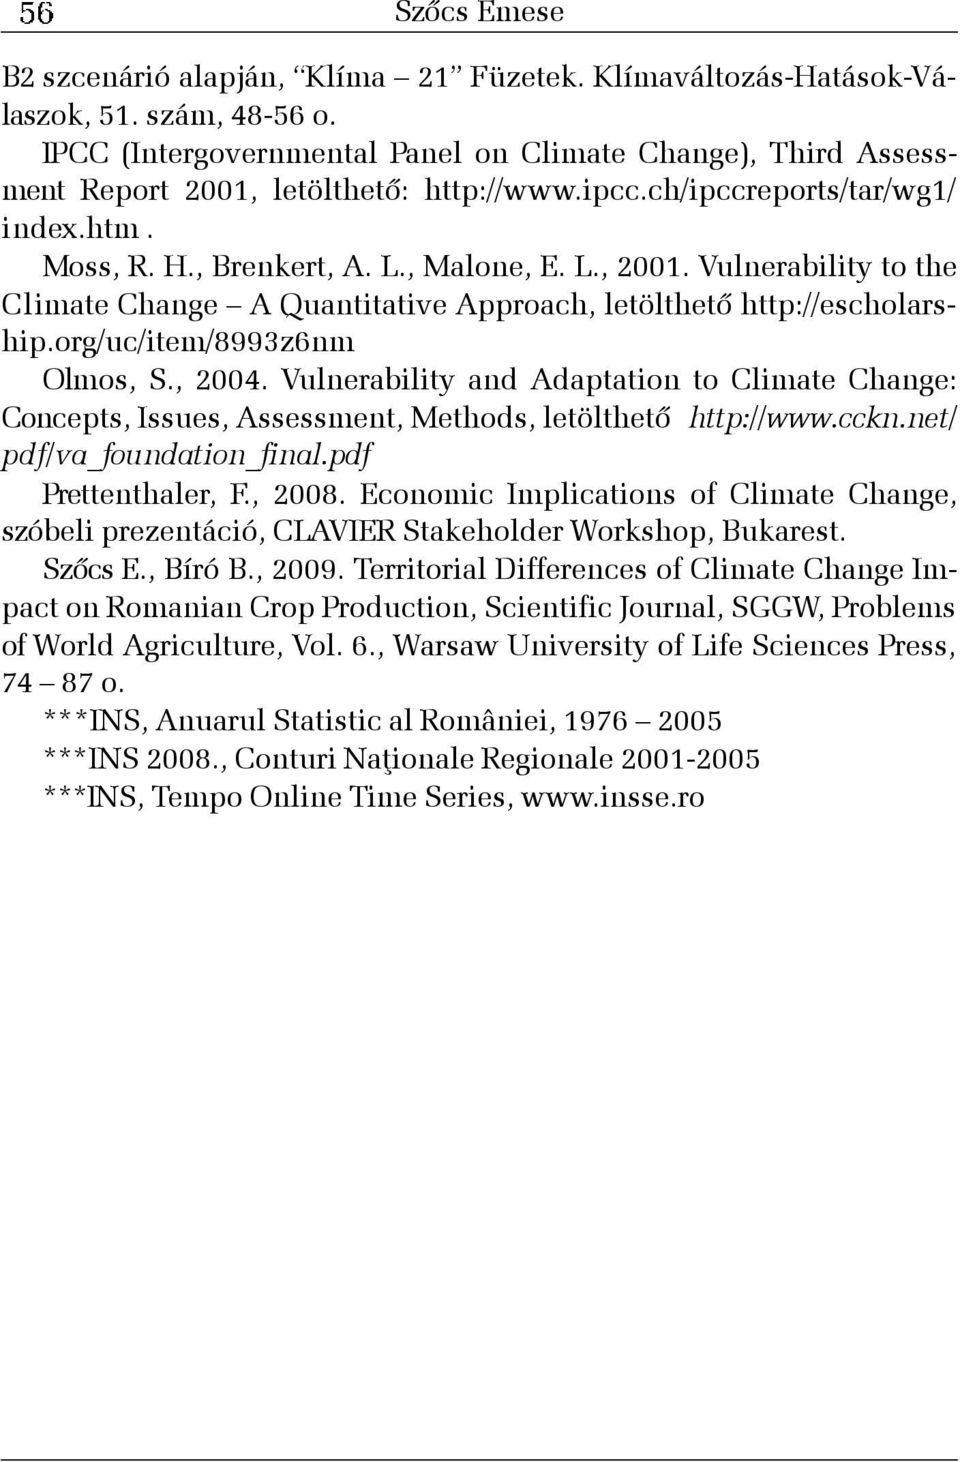 Vulnerability to the Climate Change A Quantitative Approach, letölthetõ http://escholarship.org/uc/item/8993z6nm Olmos, S., 2004.